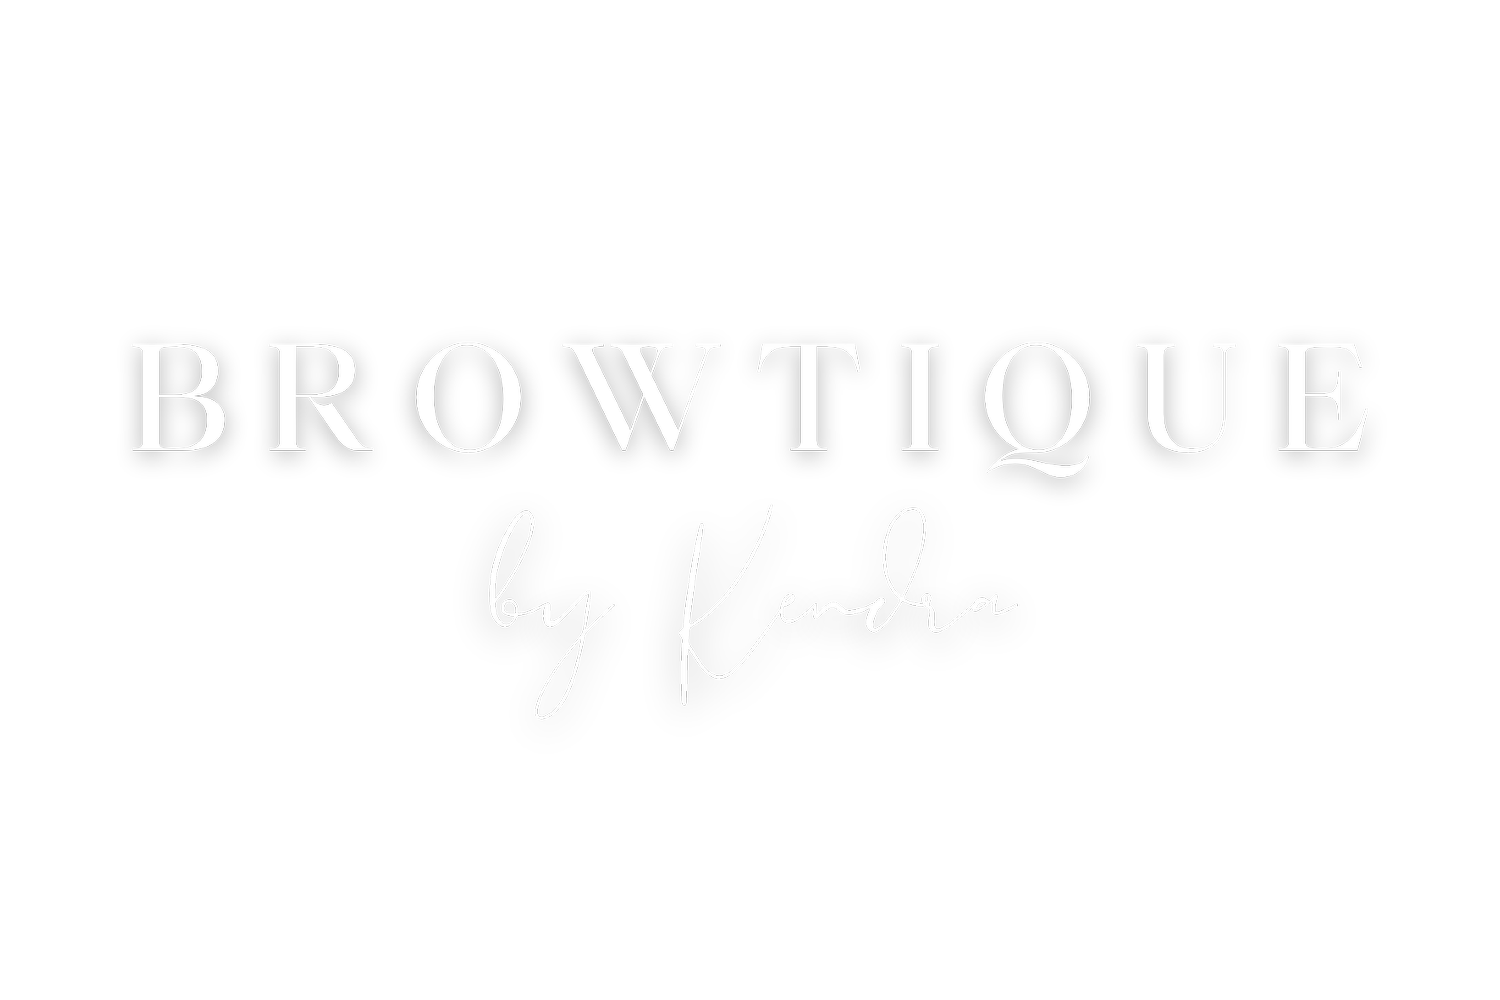 Browtique by Kendra